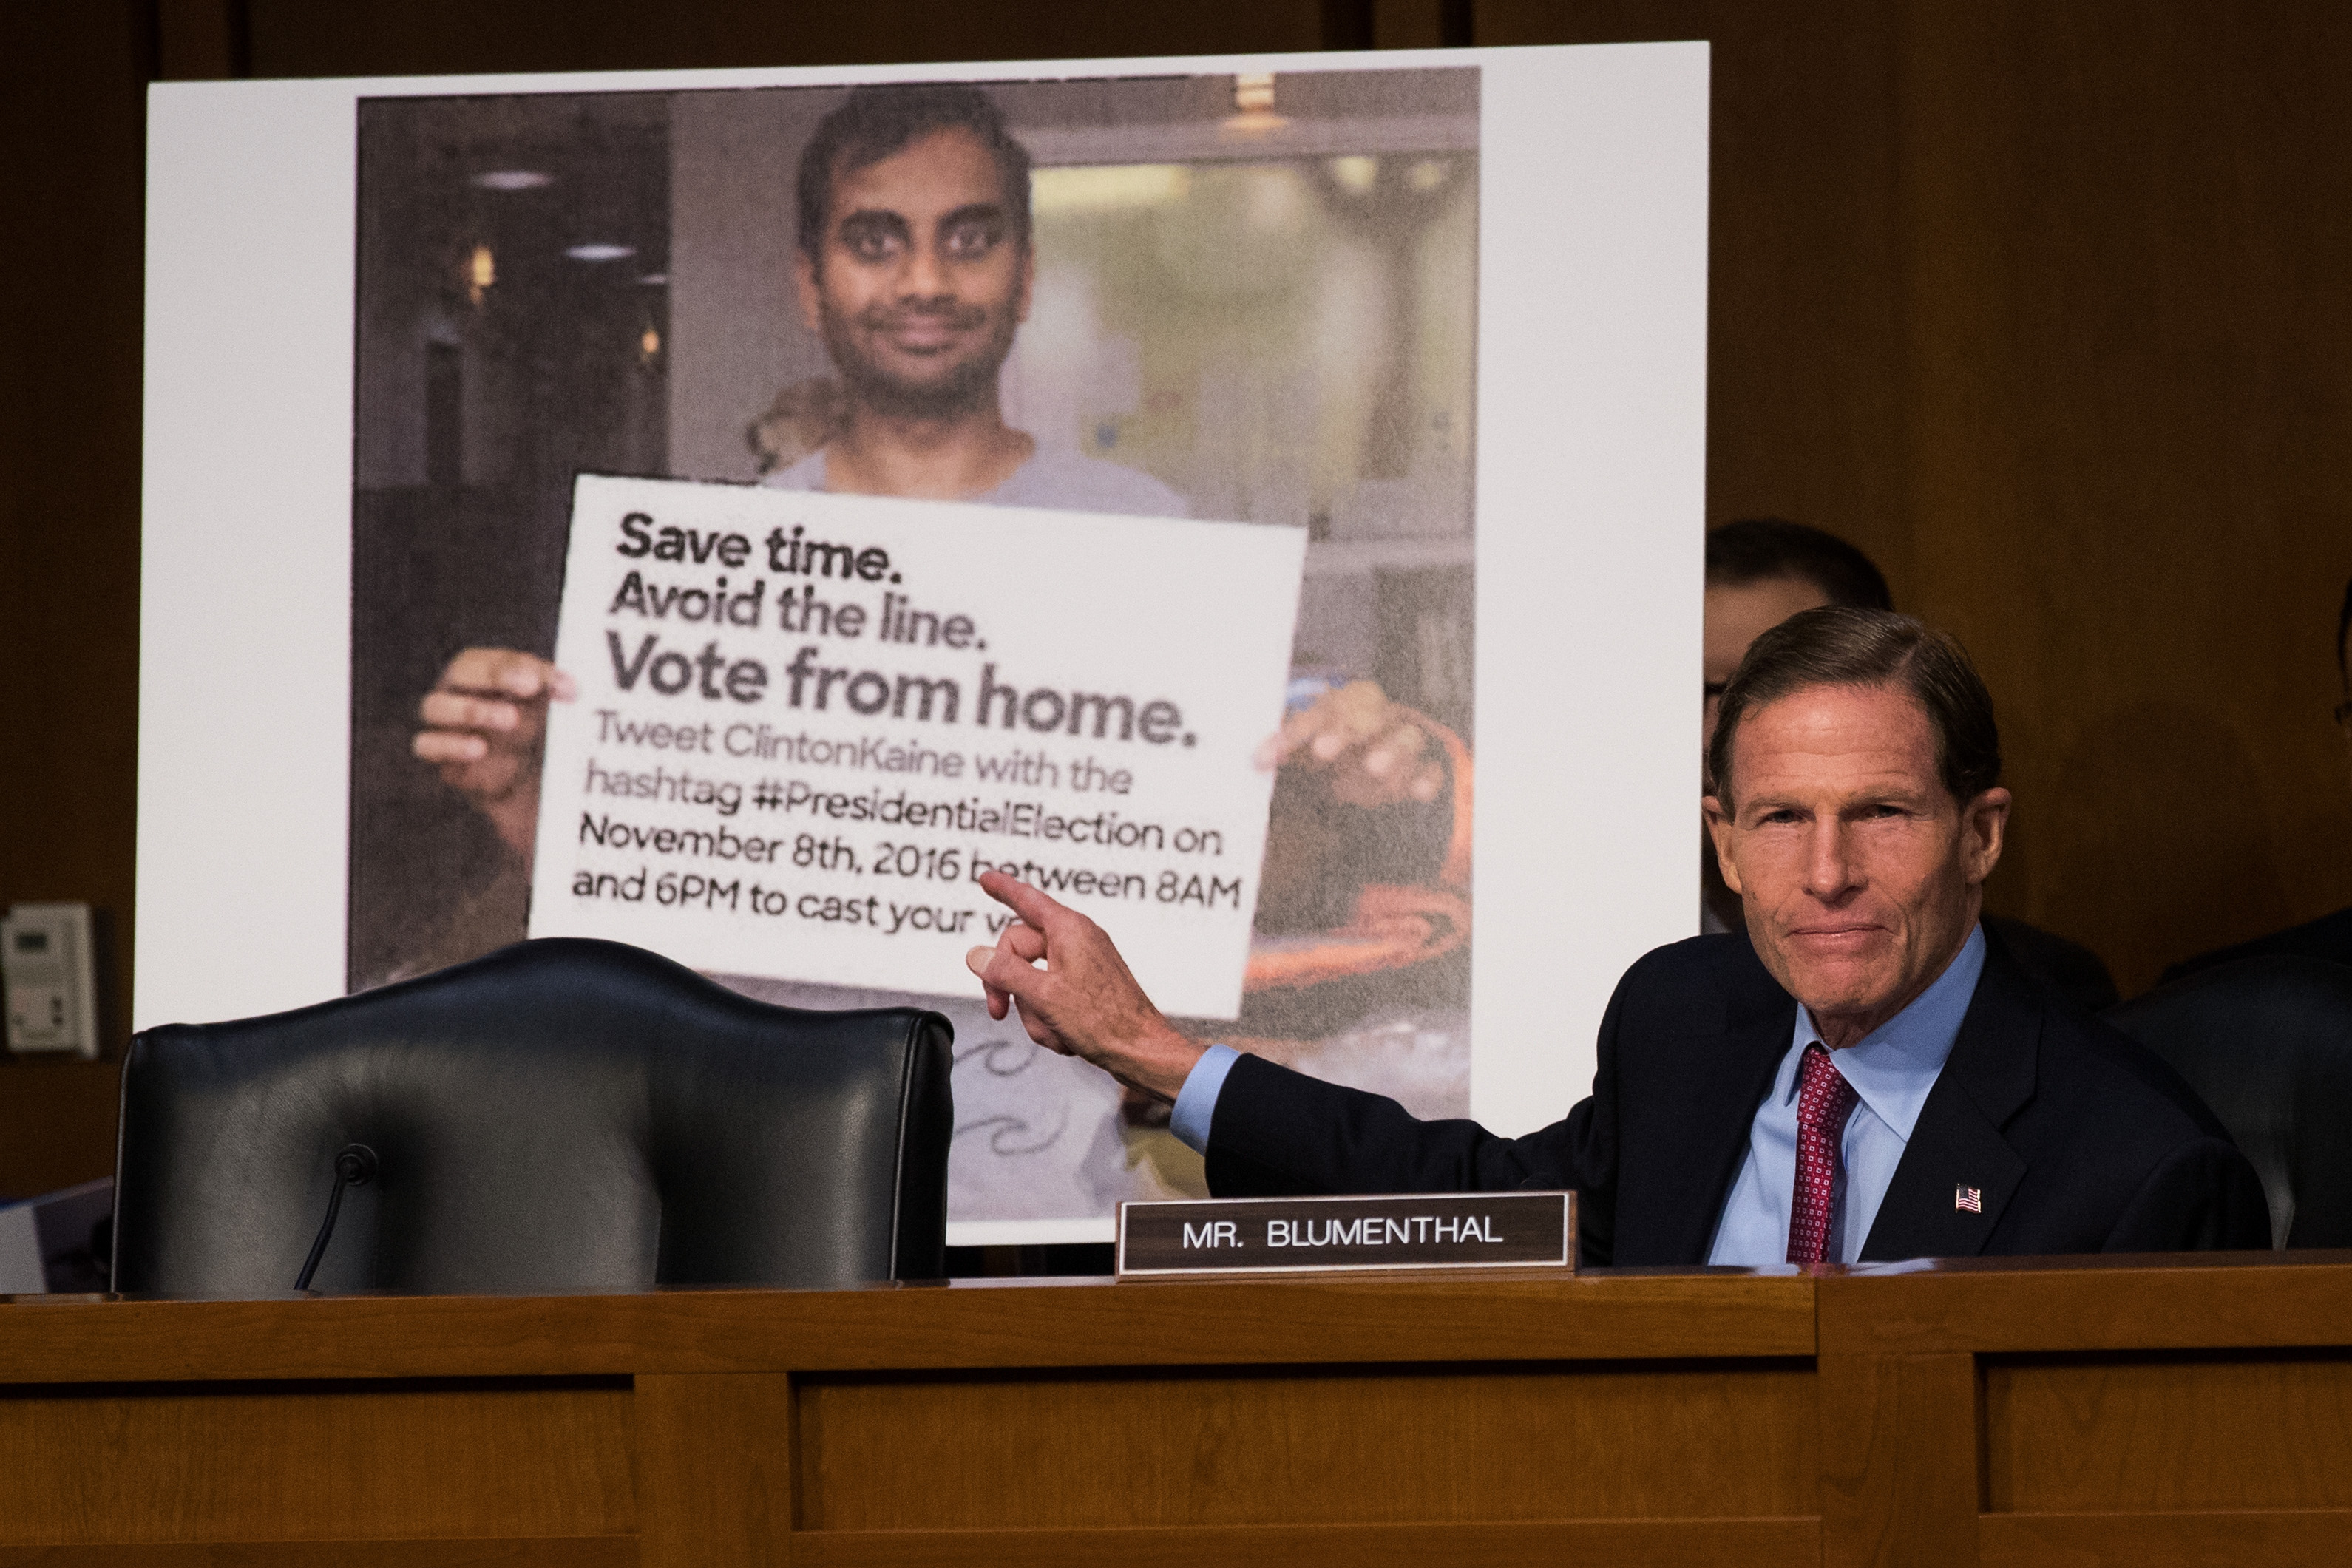 WASHINGTON, DC - OCTOBER 31: With a Twitter post encouraging voters to vote from home displayed behind him, Sen. Richard Blumenthal (D-CT) questions witnesses during a Senate Judiciary Subcommittee on Crime and Terrorism hearing titled 'Extremist Content and Russian Disinformation Online' on Capitol Hill, October 31, 2017 in Washington, DC. The committee questioned the tech company representatives about attempts by Russian operatives to spread disinformation and purchase political ads on their platforms, and what efforts the companies plan to use to prevent similar incidents in future elections. (Drew Angerer/Getty Images)